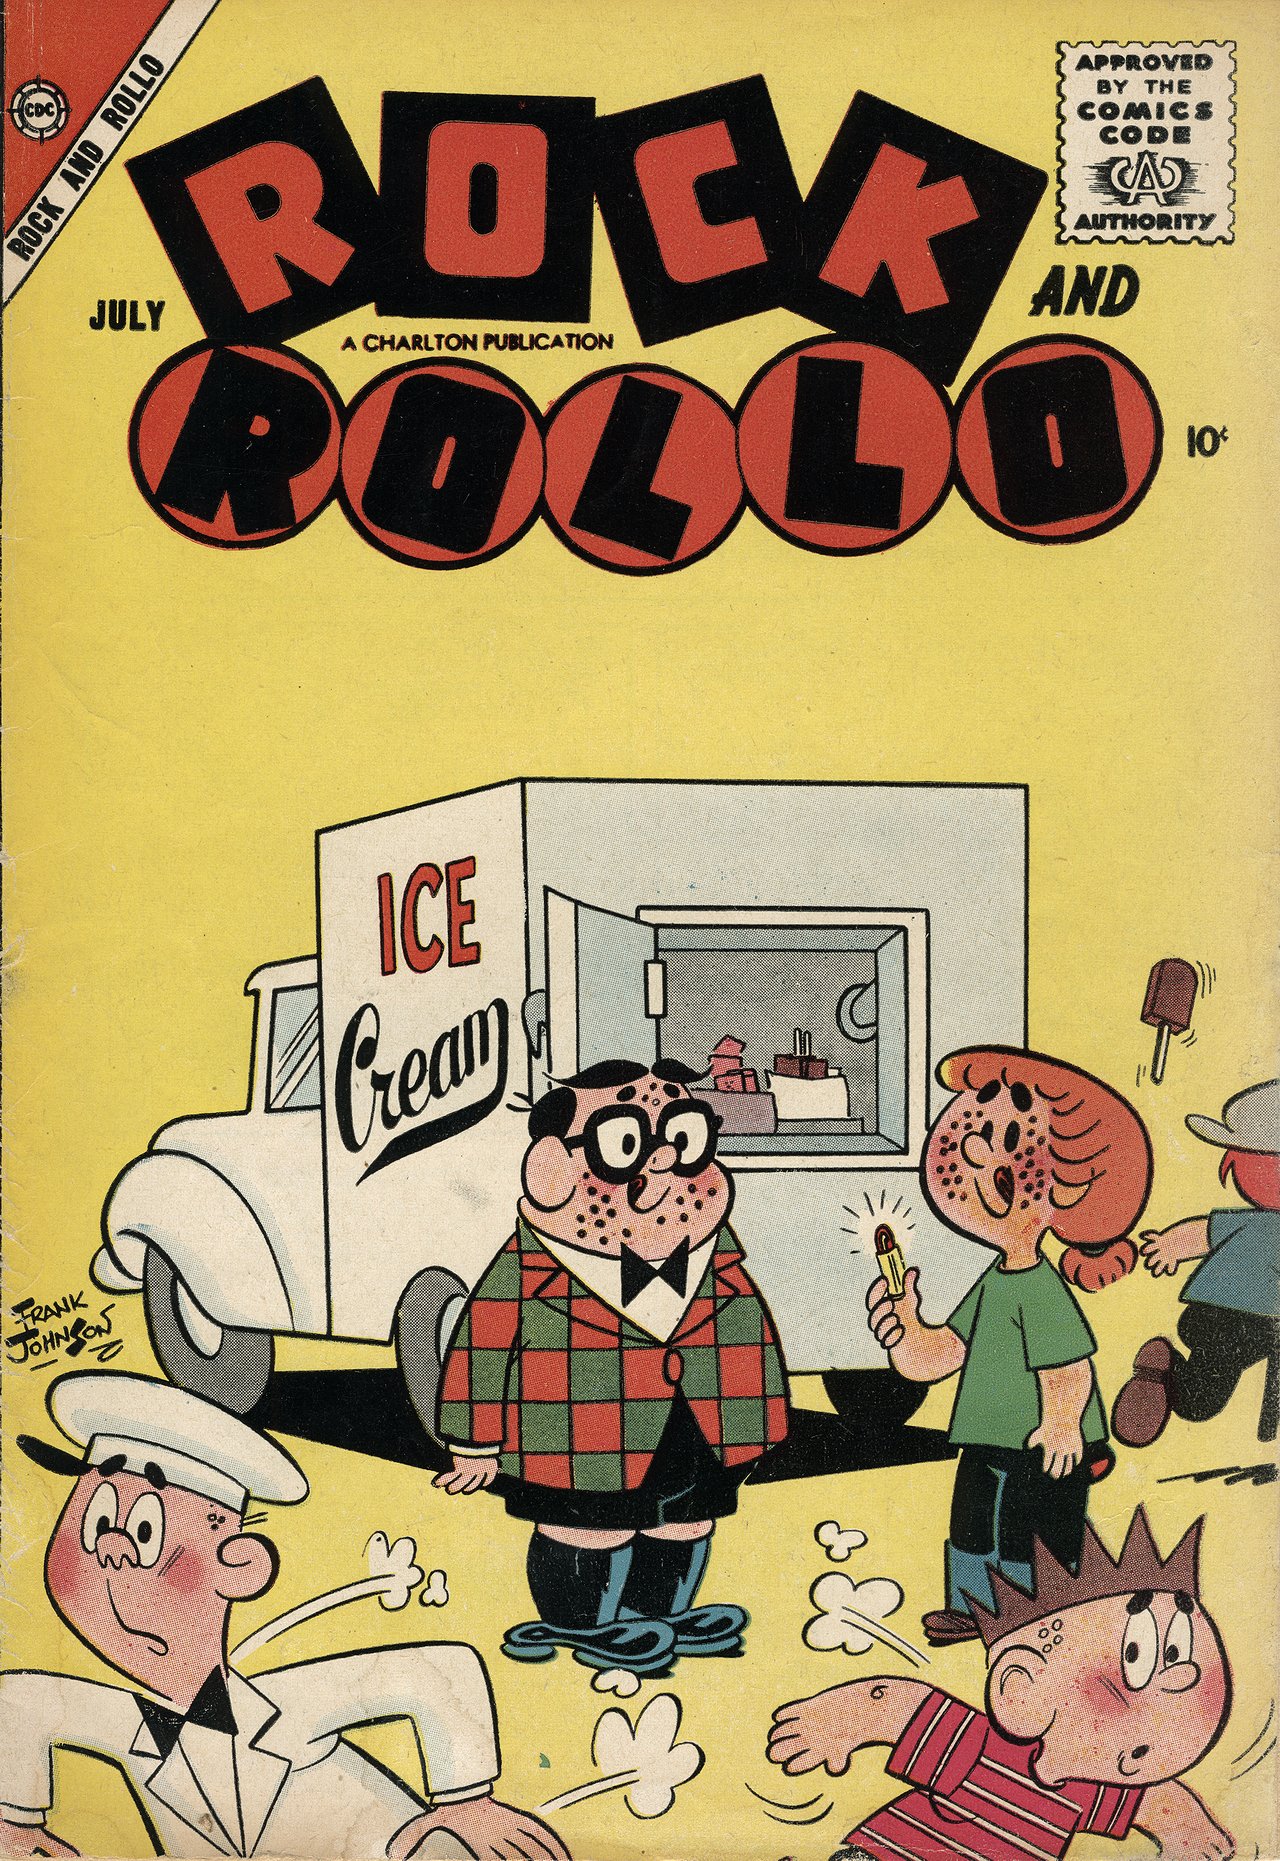 Read online Rock and Rollo comic -  Issue #18 - 1